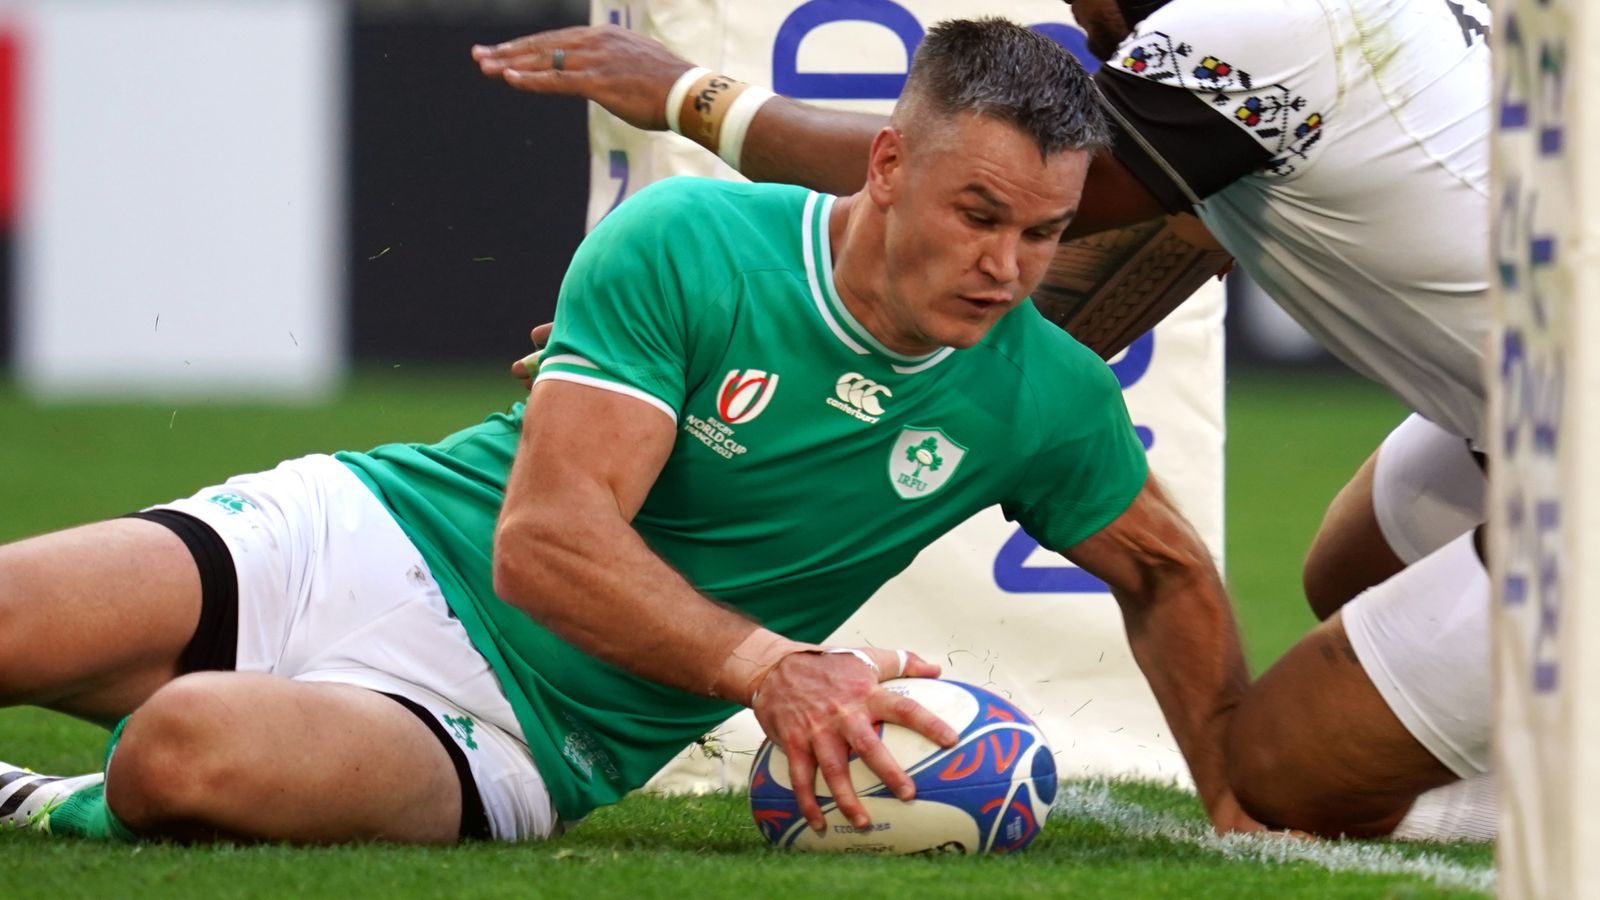 Ireland 82-8 Romania Johnny Sexton stars on return as Irish romp to victory in Rugby World Cup opener Rugby Union News Sky Sports